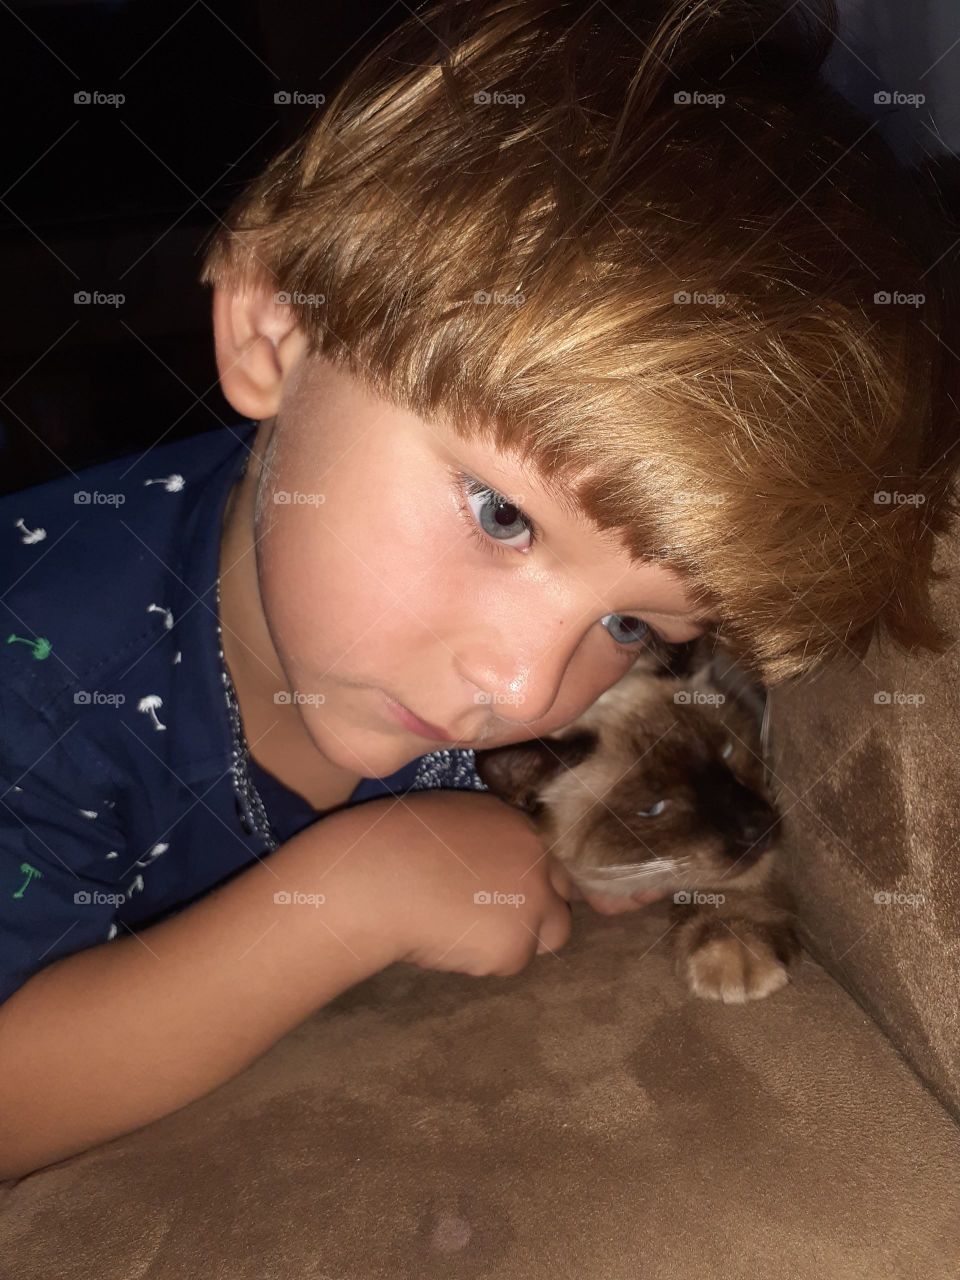 pretty child playing with the kitten